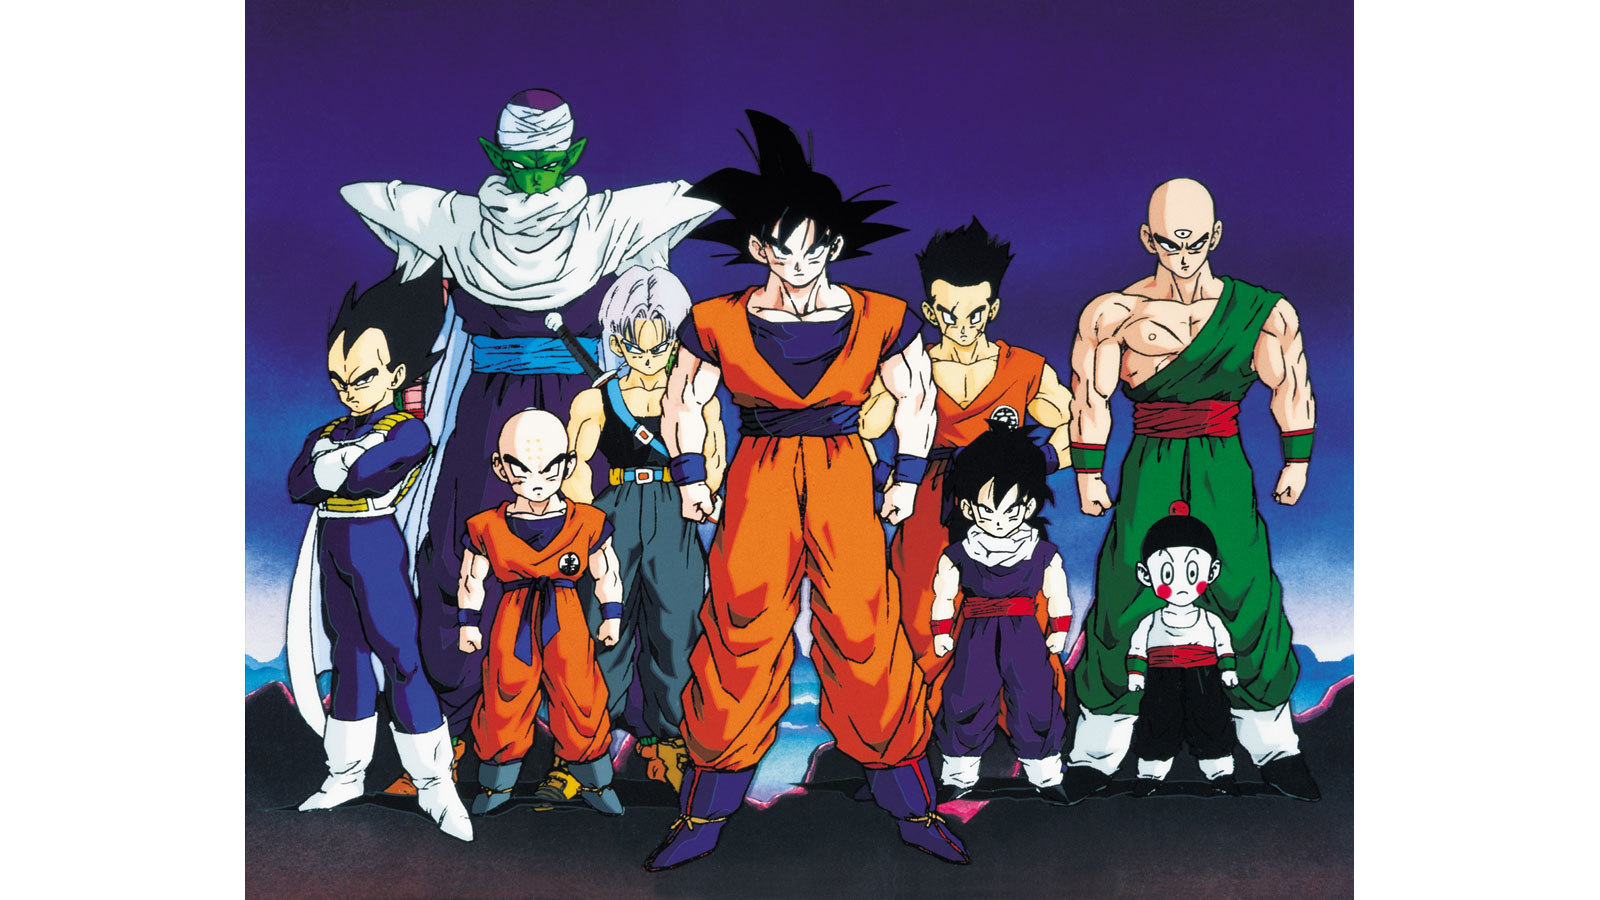 DRAGON BALL, DRAGON BALL Z, AND DRAGON BALL GT ARE ALL NOW AVAILABLE ON CRUNCHYROLL! *NEW POST*